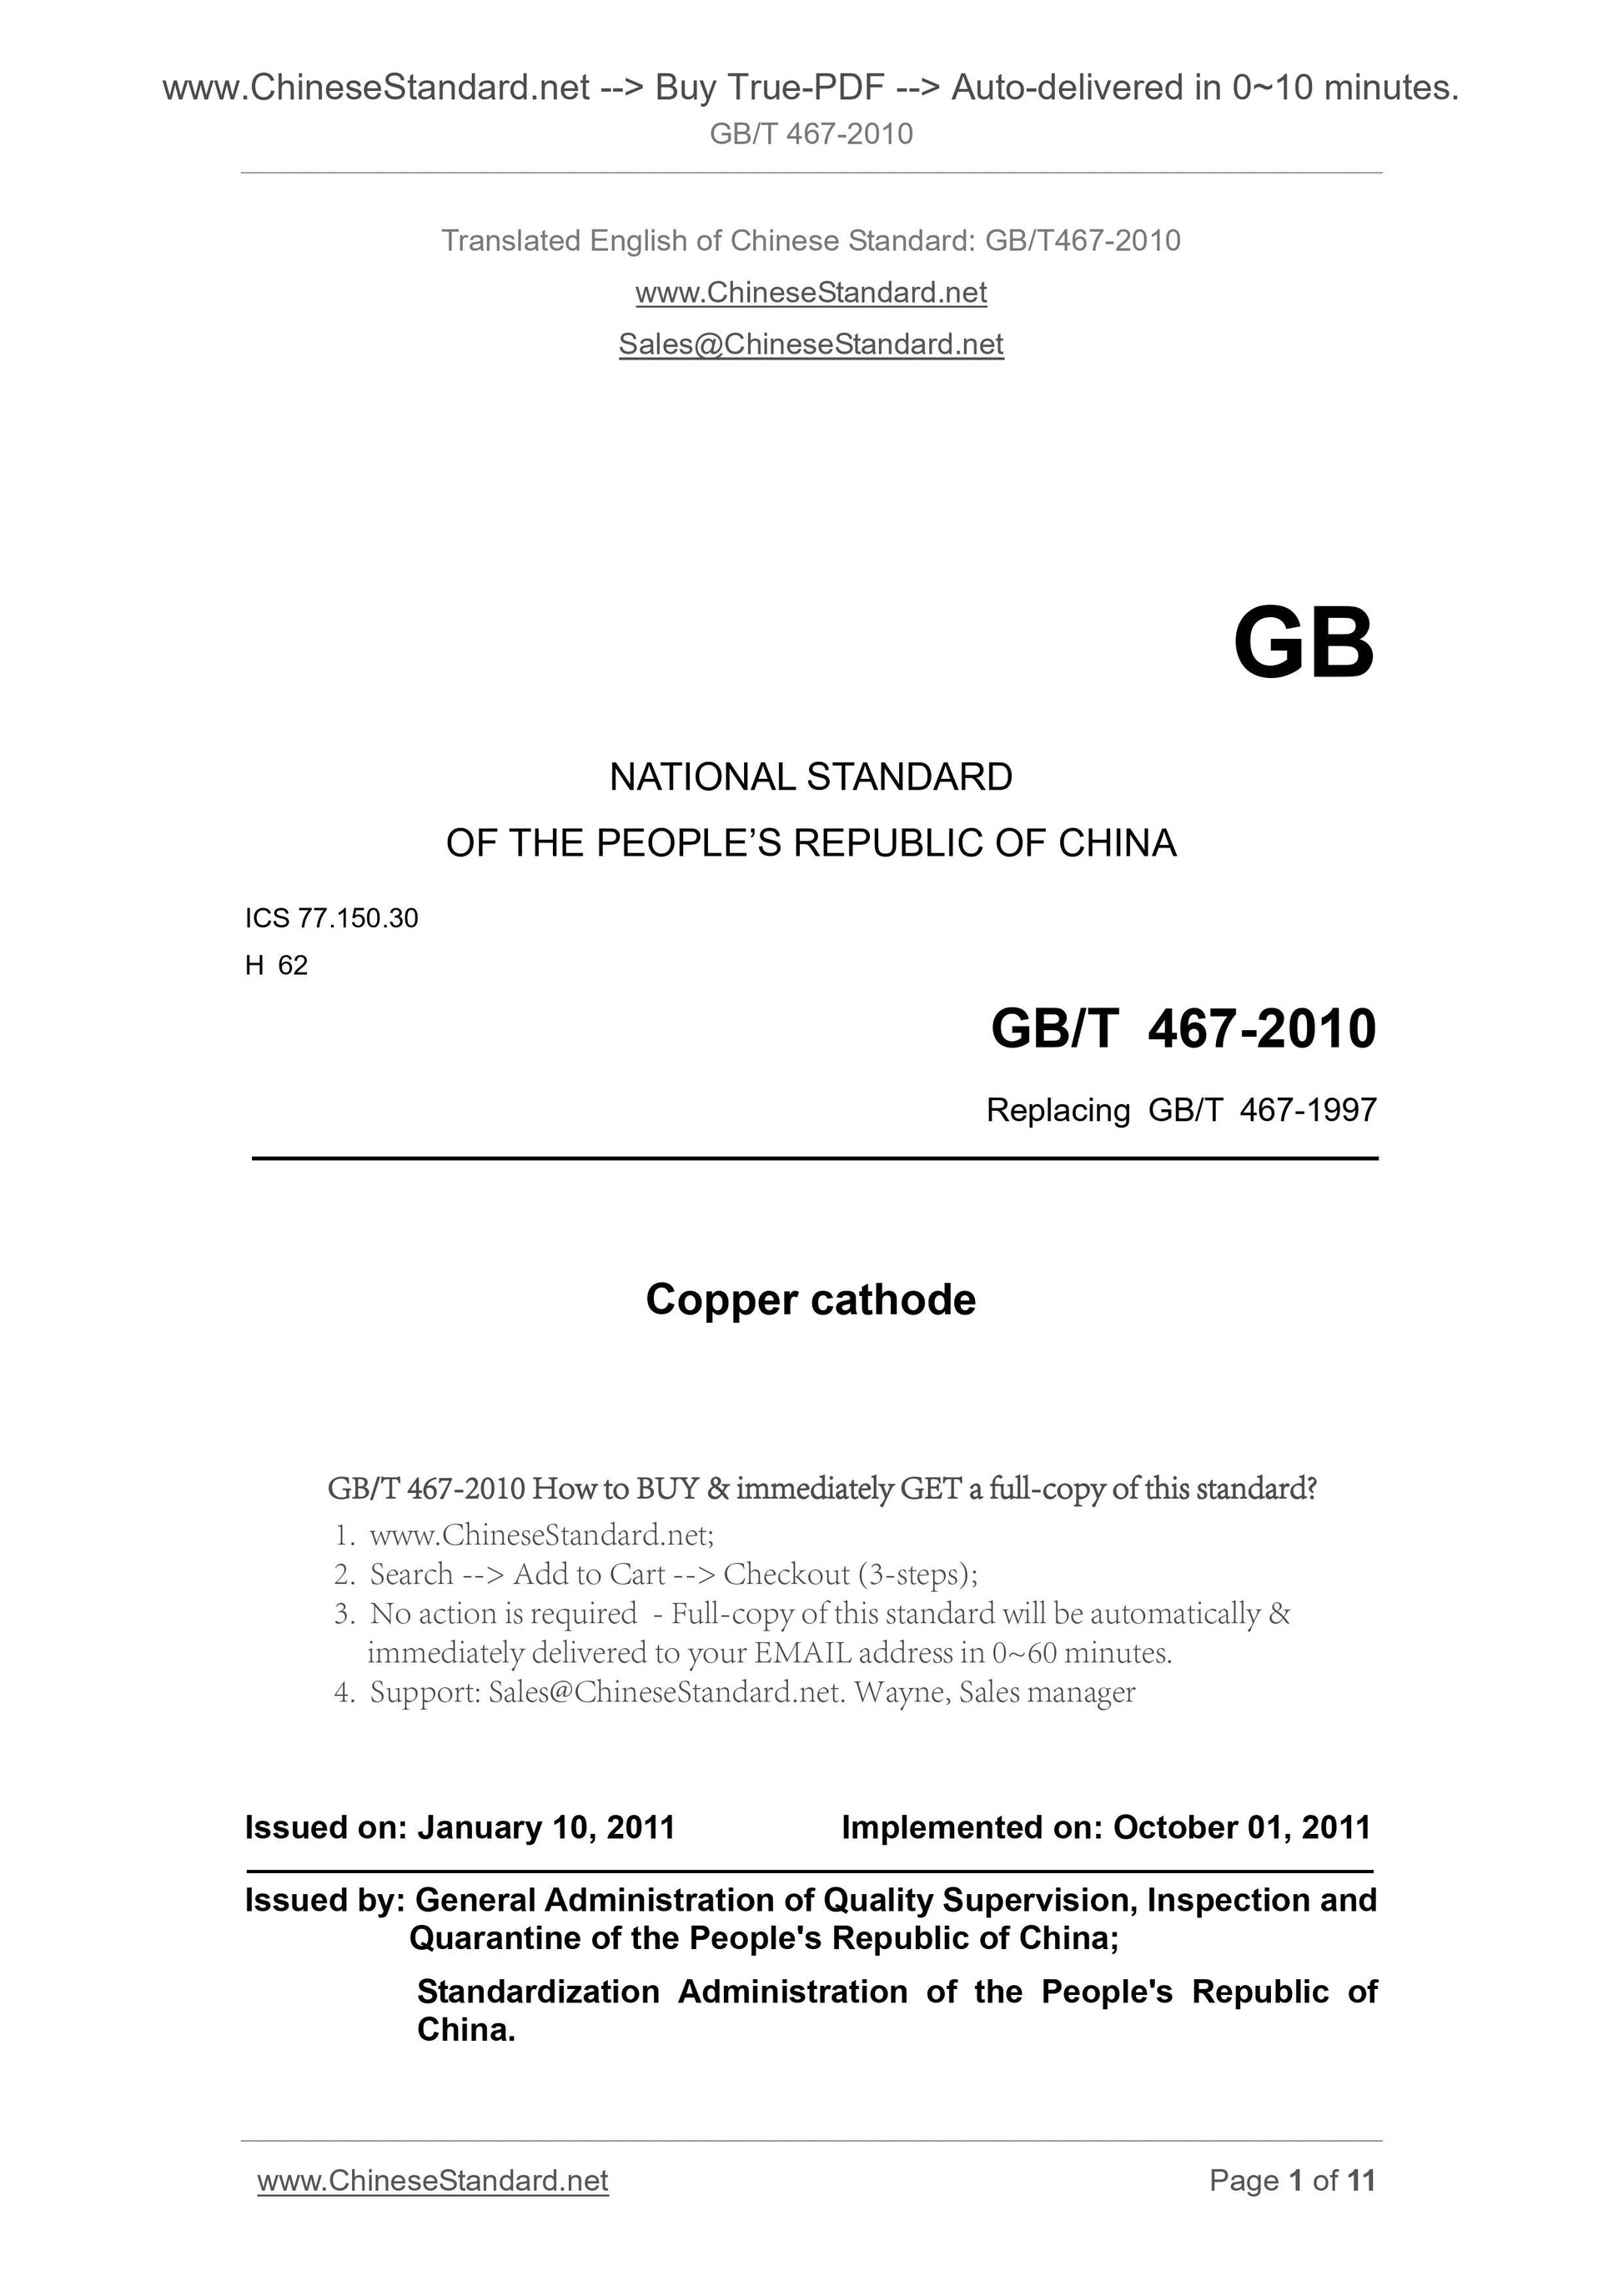 GB/T 467-2010 Page 1